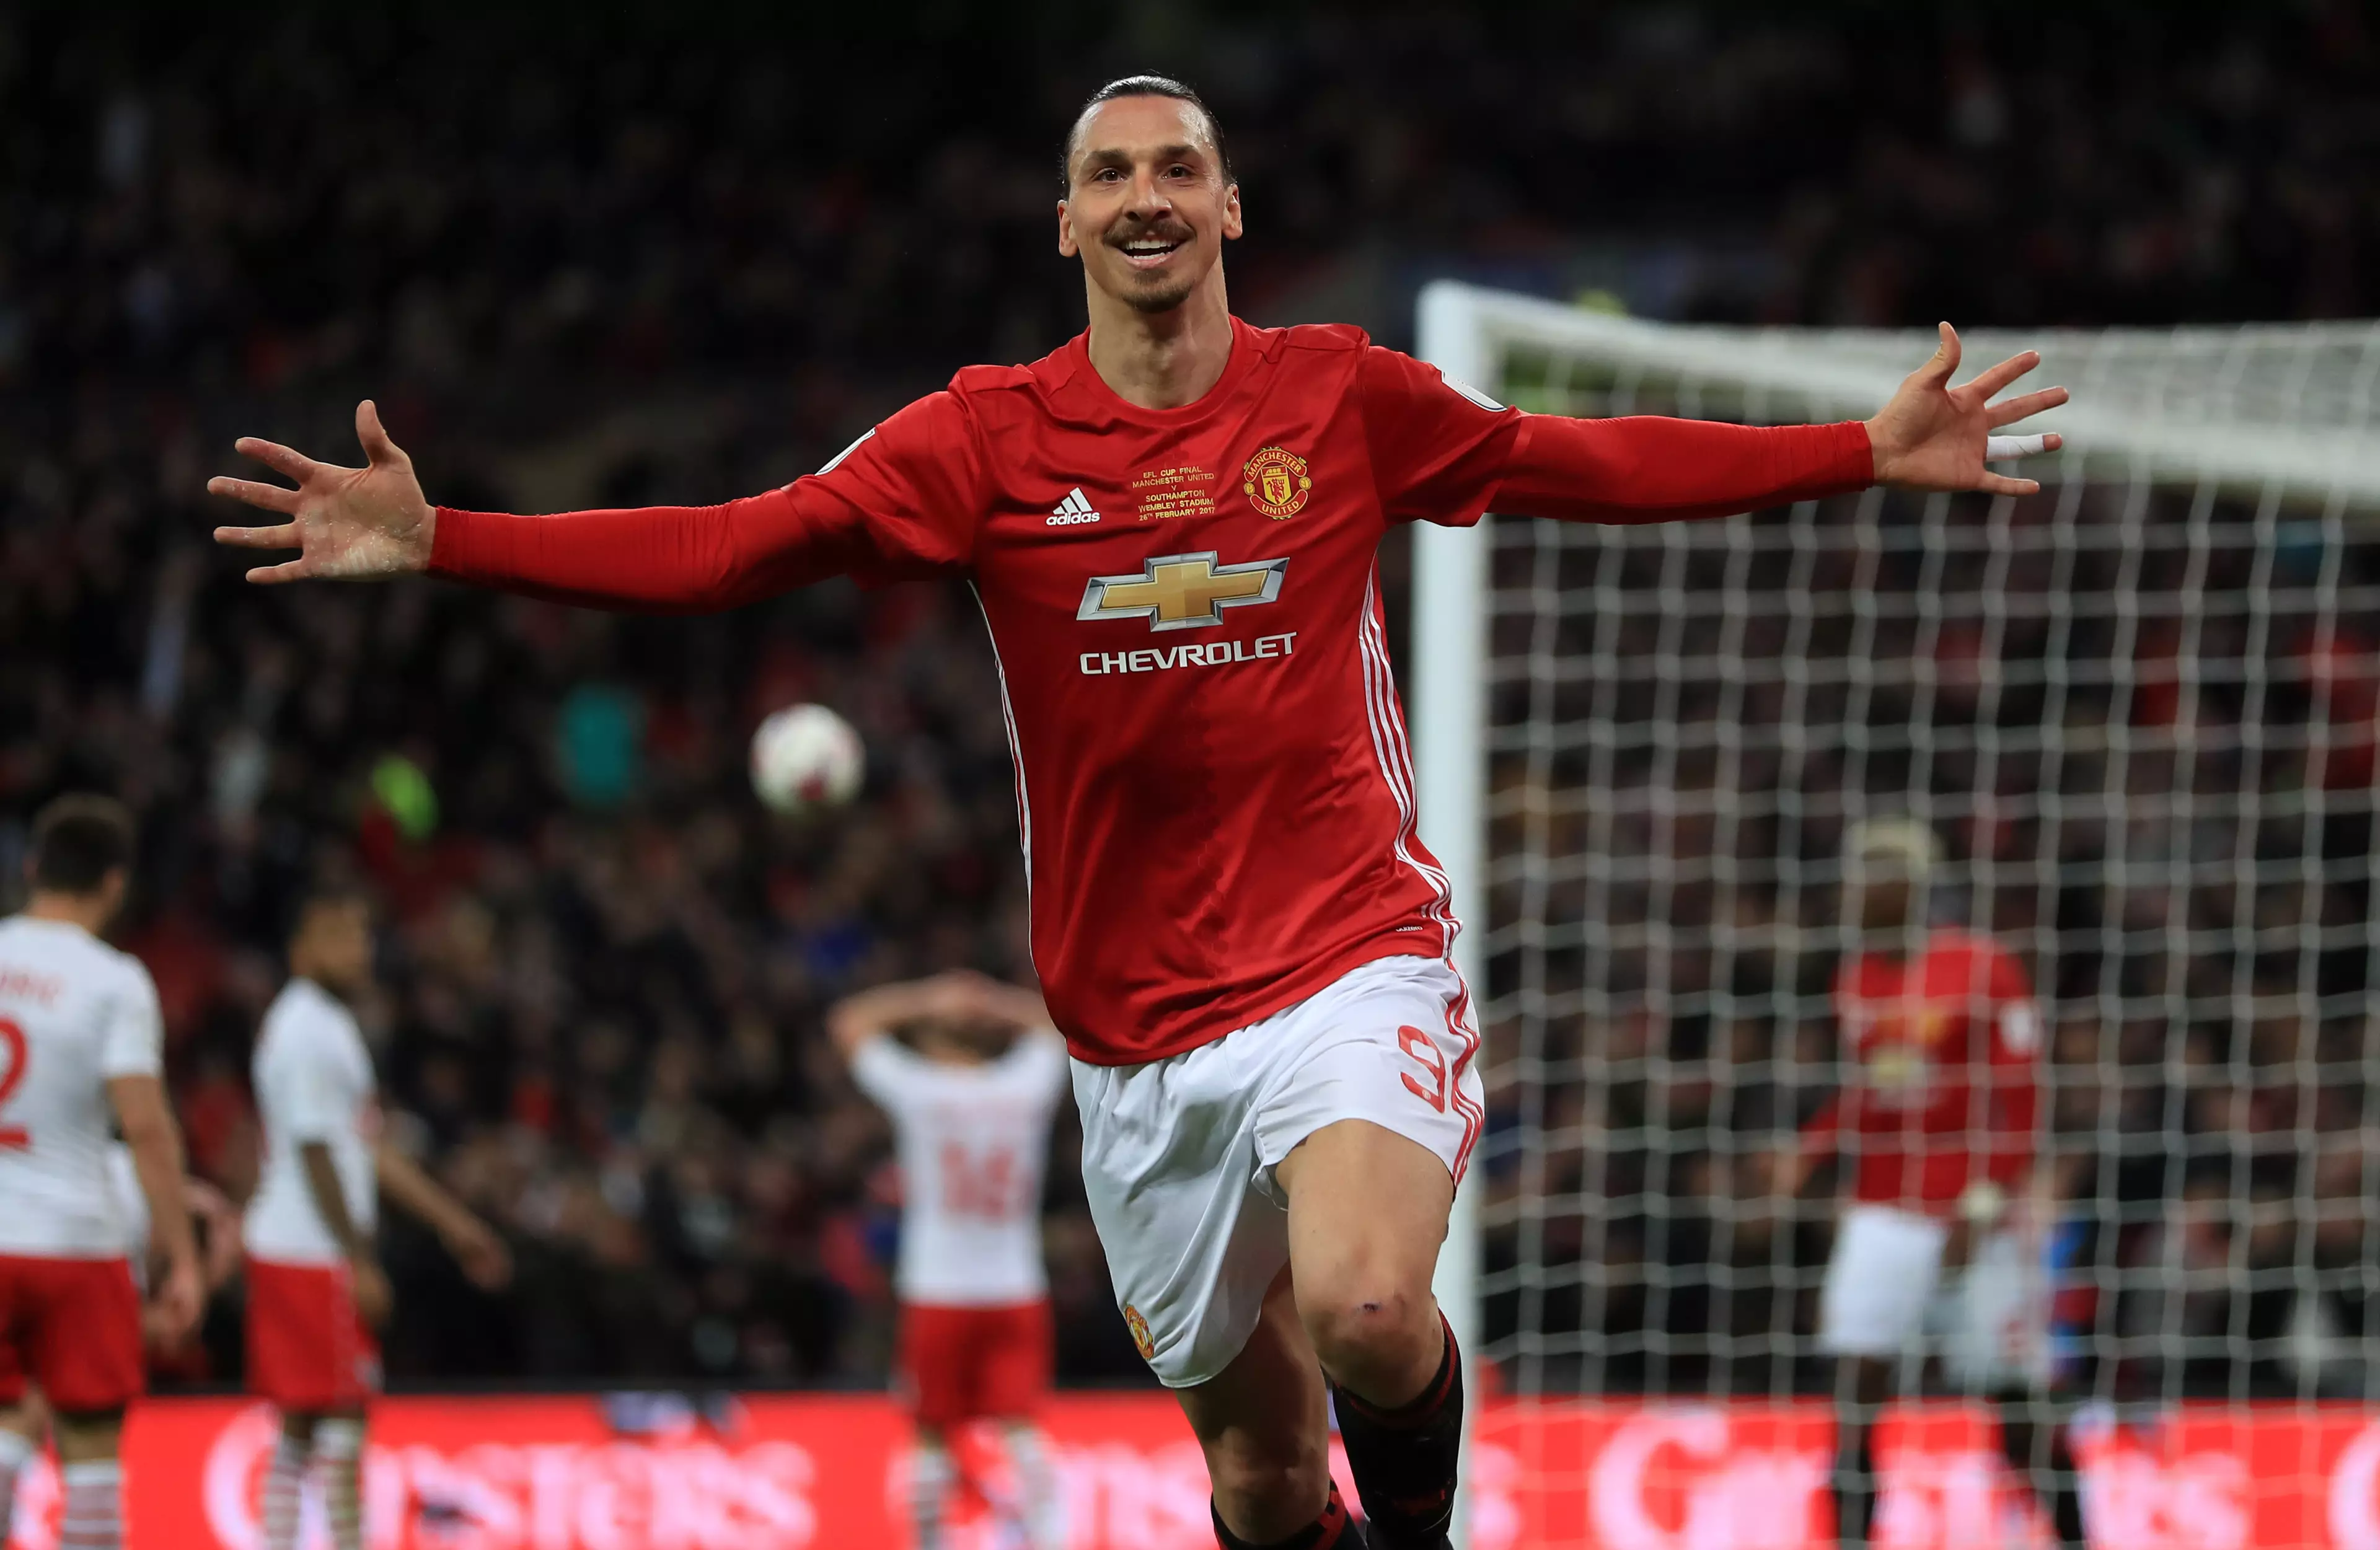 Ibrahimovic's first season saw him score a brace in the EFL Cup final. Image: PA Images